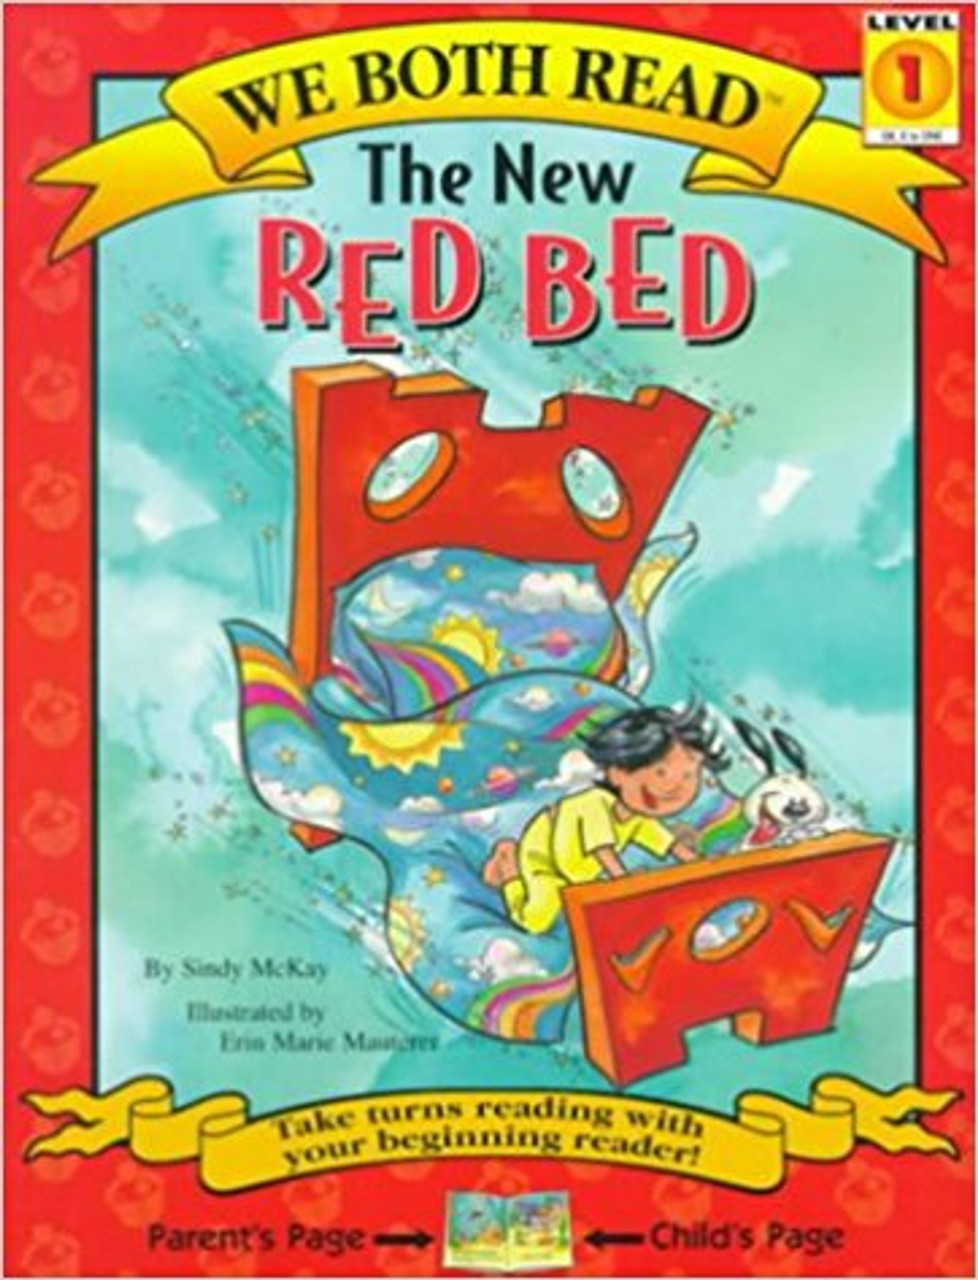 The New Red Bed by Sindy McKay